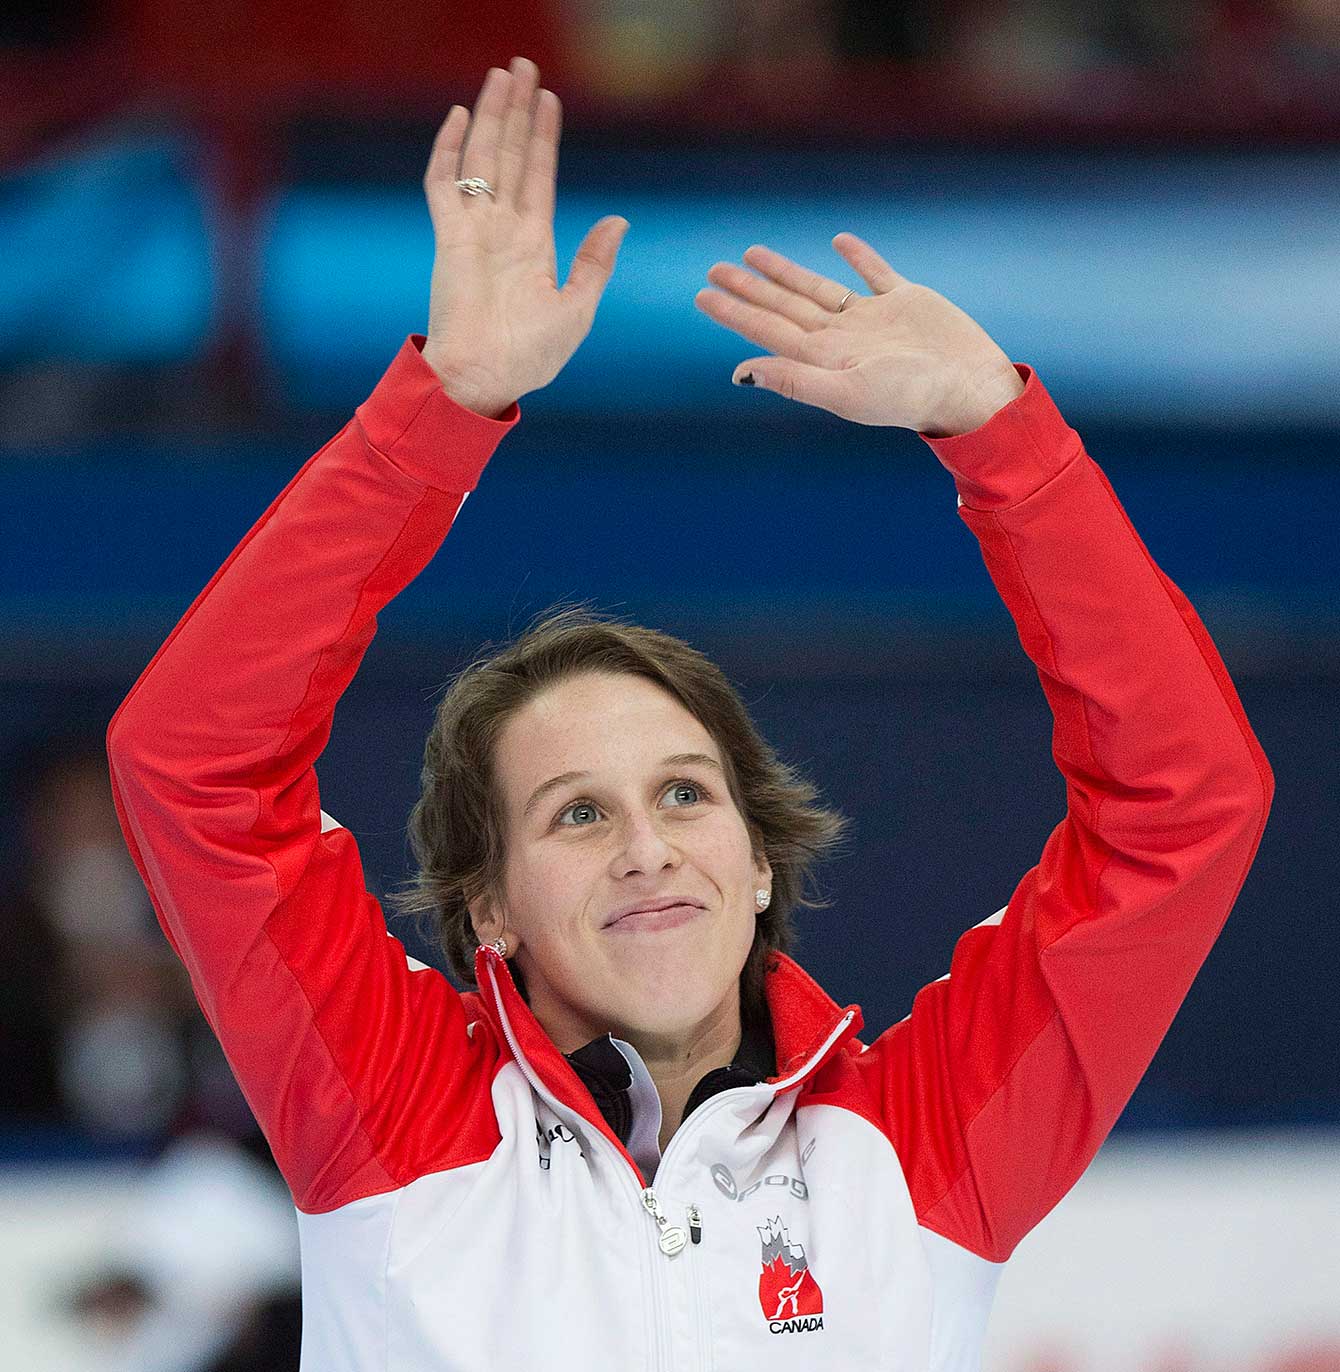 Marianne St-Gelais from Canada waves to fans after finishing second in the women's 500-metre final race at the ISU World Cup Short Track Speedskating competition in Montreal, Saturday, November 15, 2014. THE CANADIAN PRESS/Graham Hughes